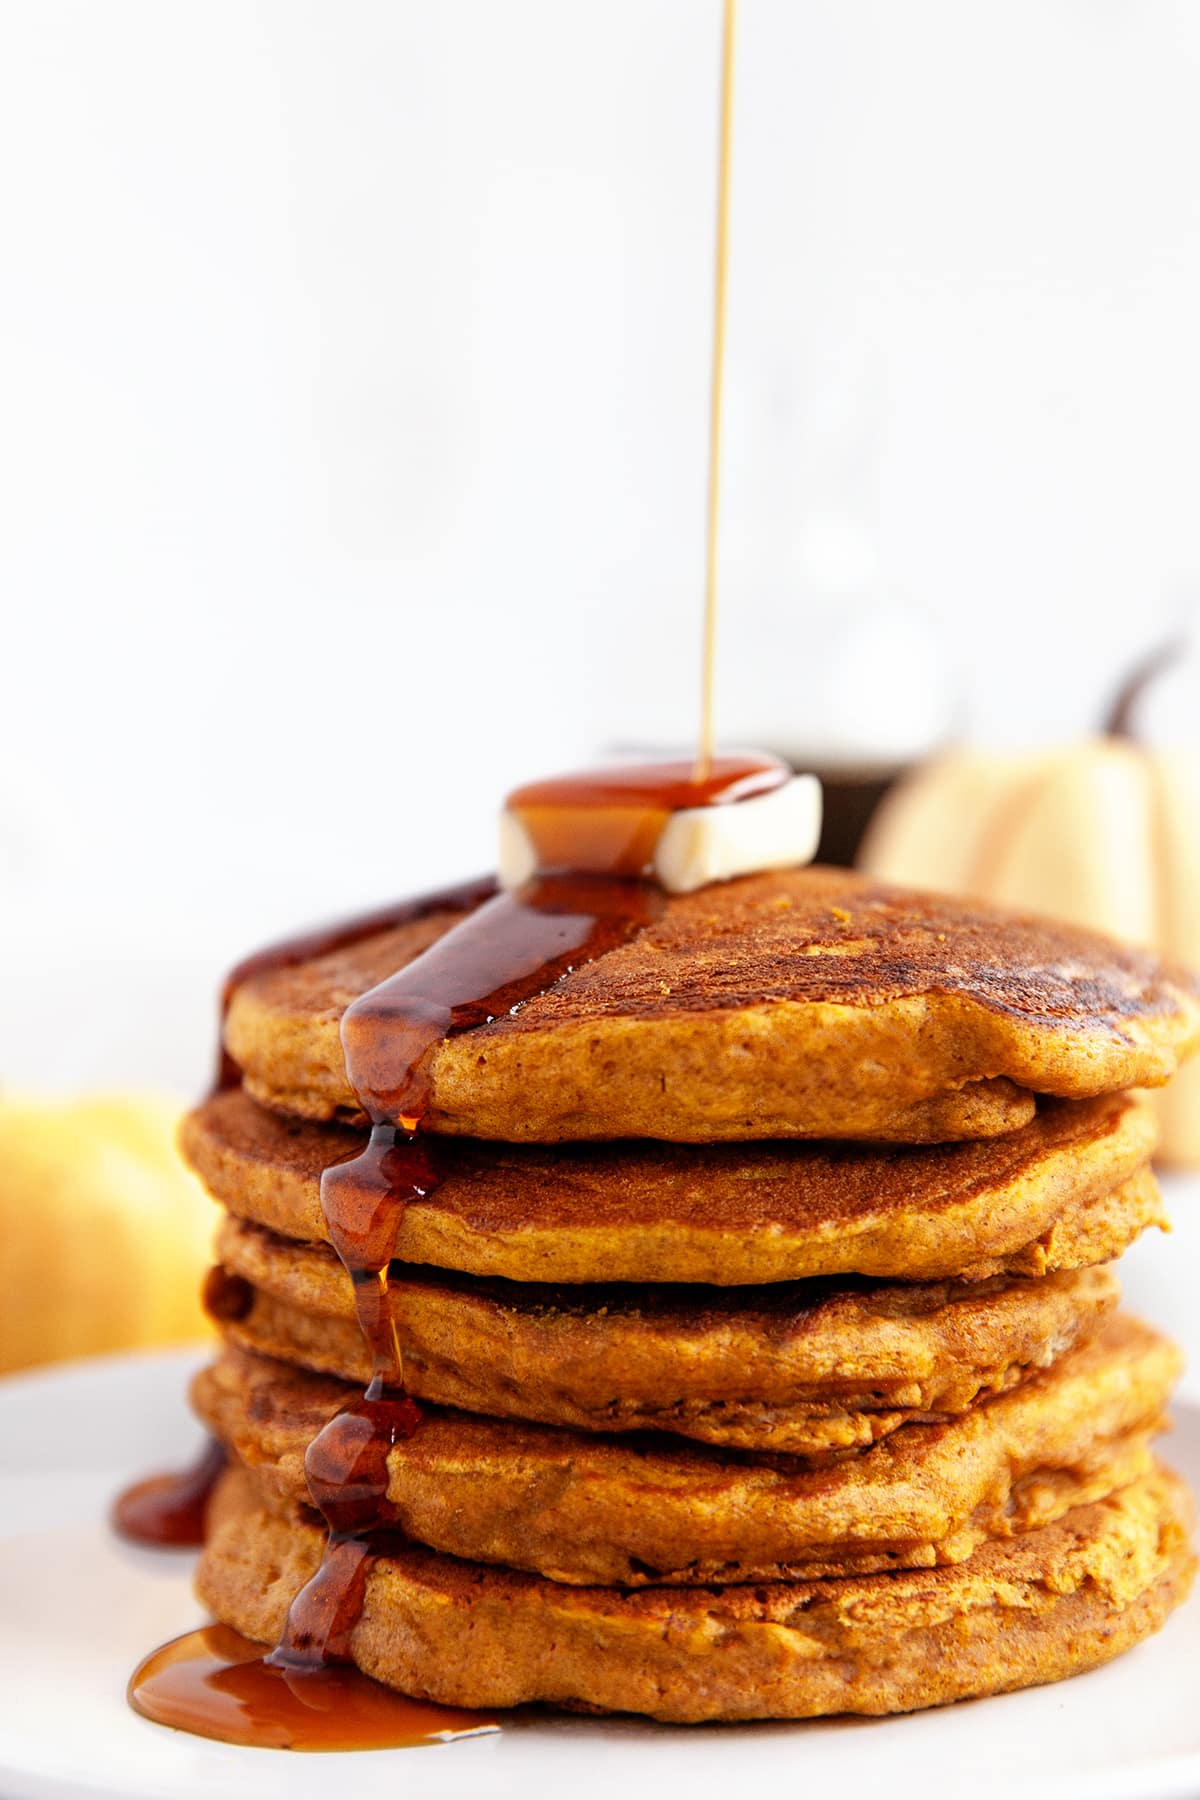 Pouring the syrup over a stack of pumpkin pancakes.